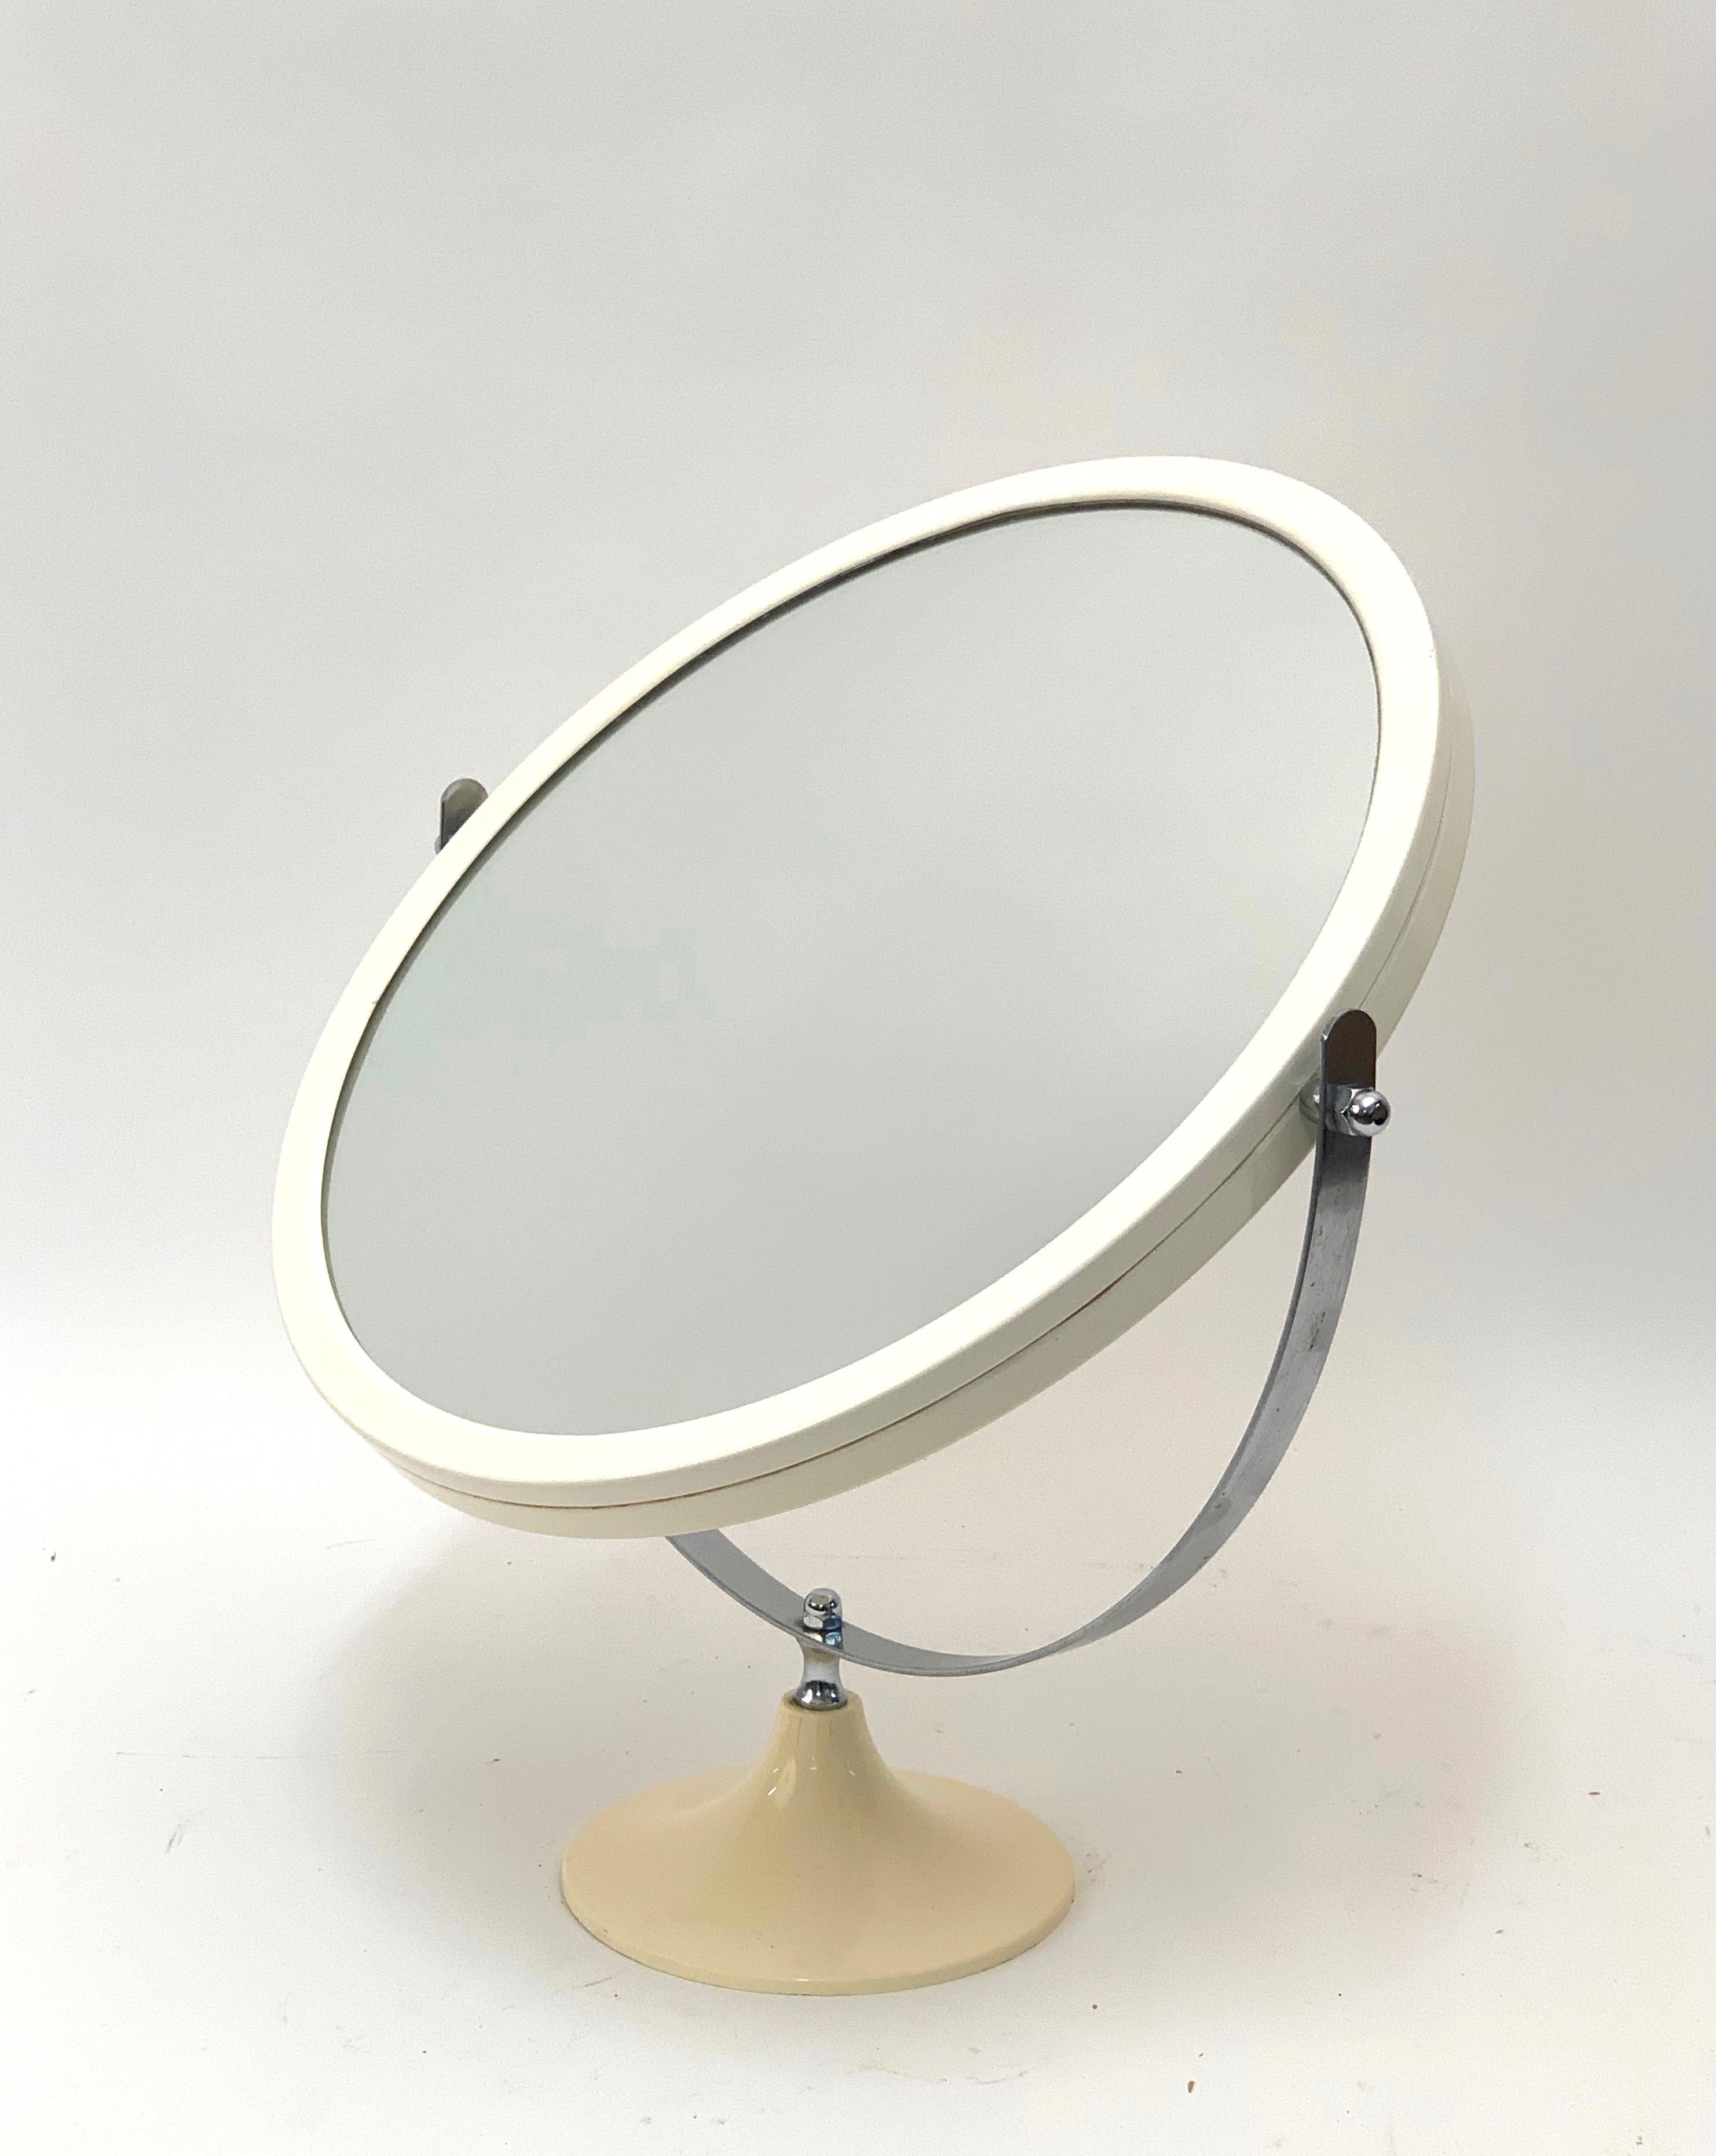 Midcentury Metal and White Plastic Round Italian Table Mirror, Italy, 1980s For Sale 6